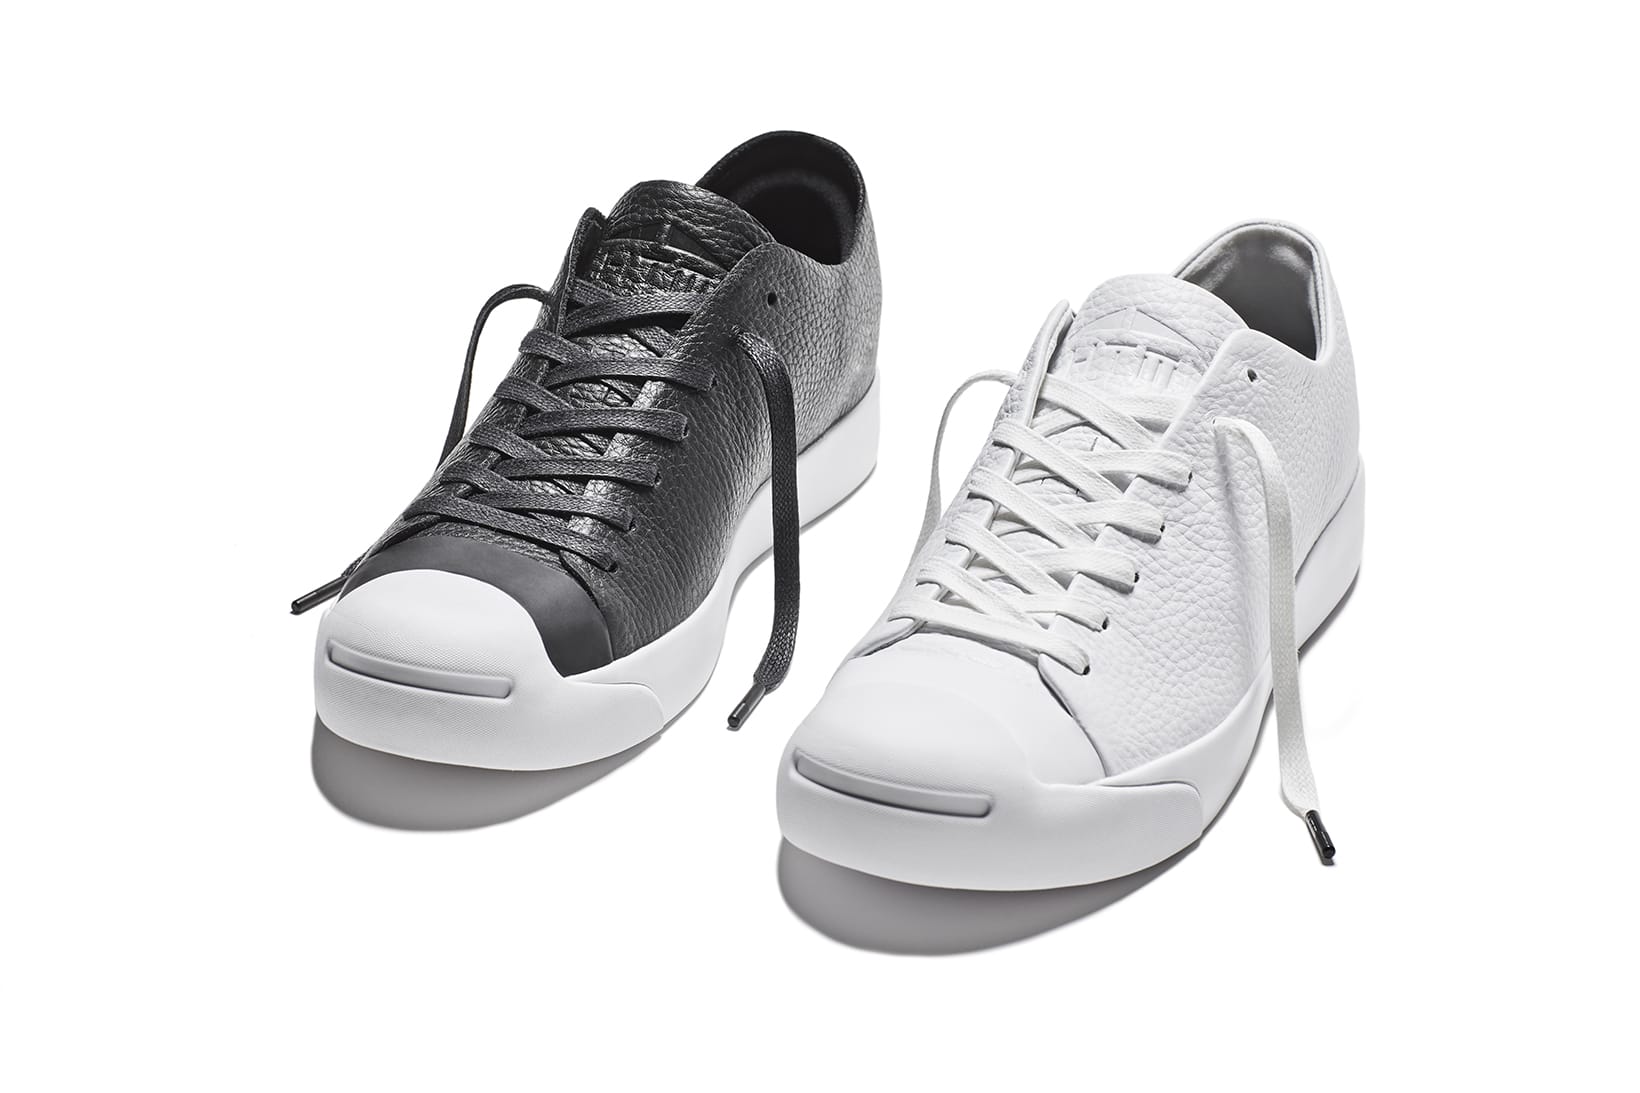 converse jack purcell 2016